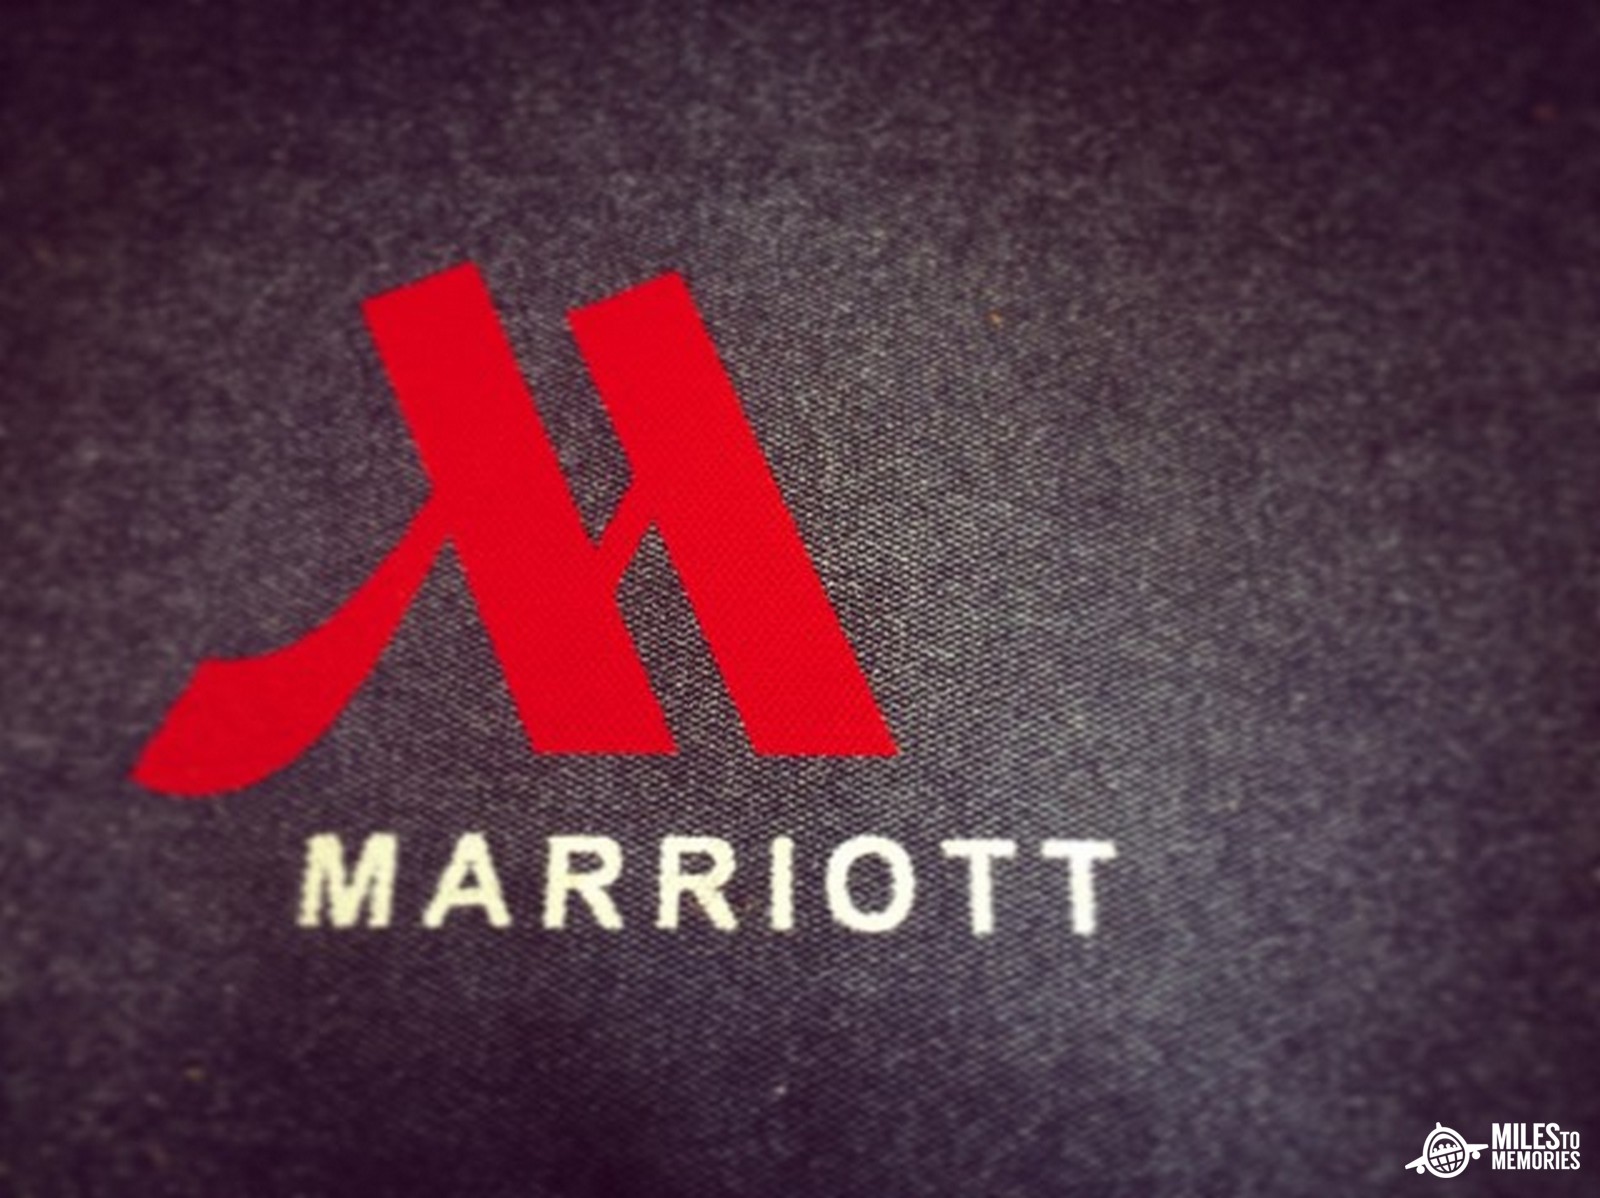 Marriott Hotel Caught Playing Games With Loyalty Perks & Upgrades